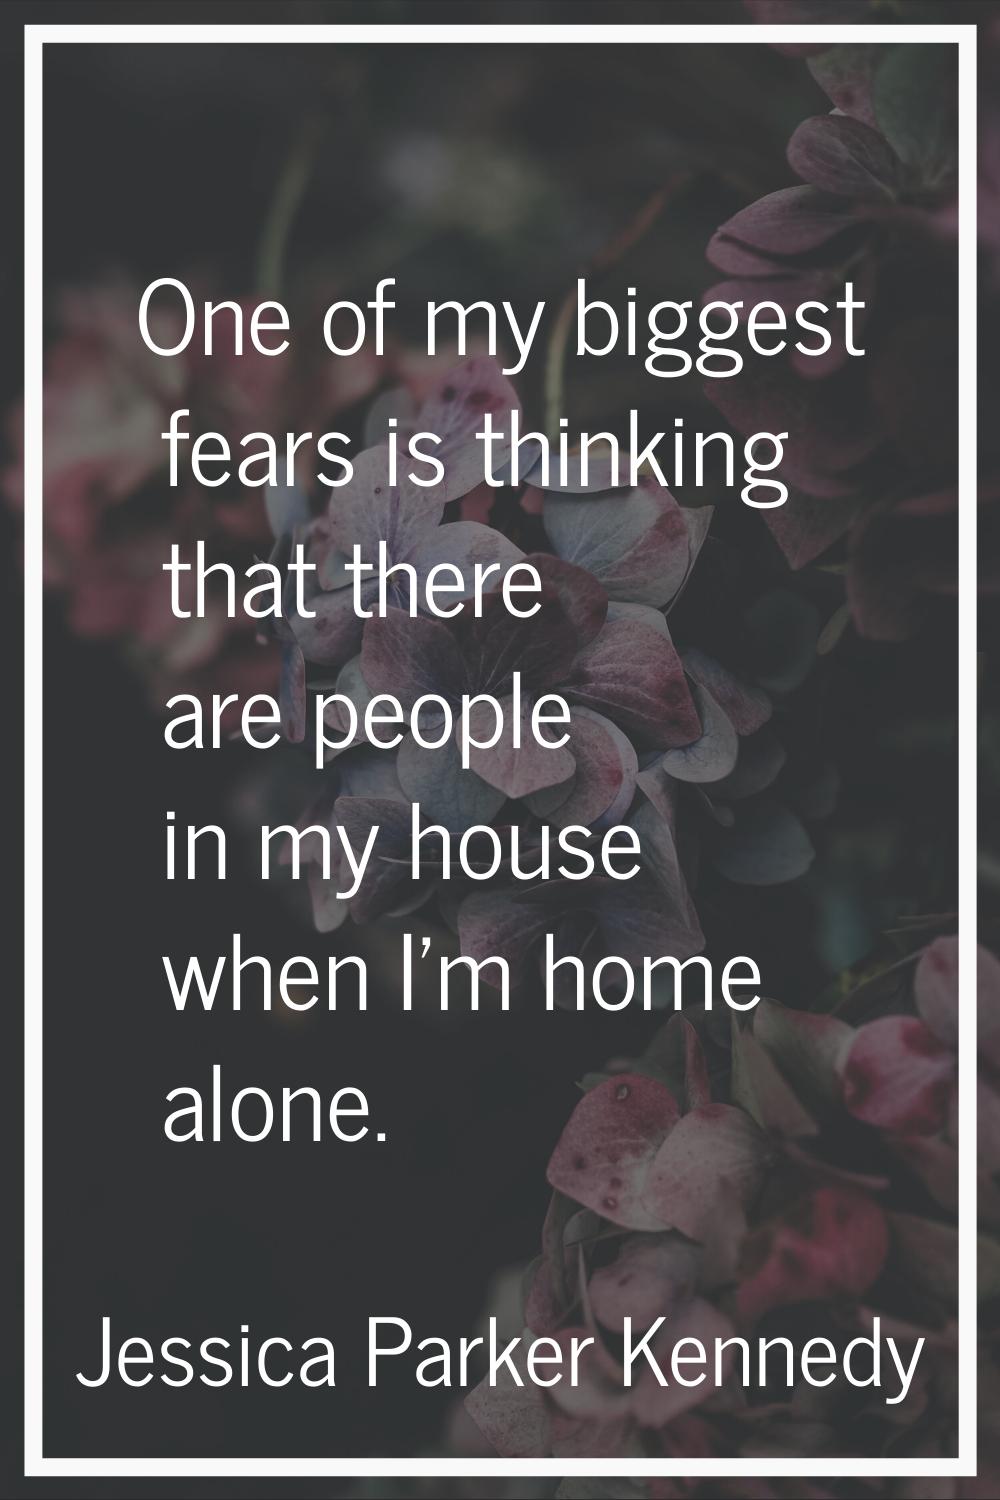 One of my biggest fears is thinking that there are people in my house when I'm home alone.